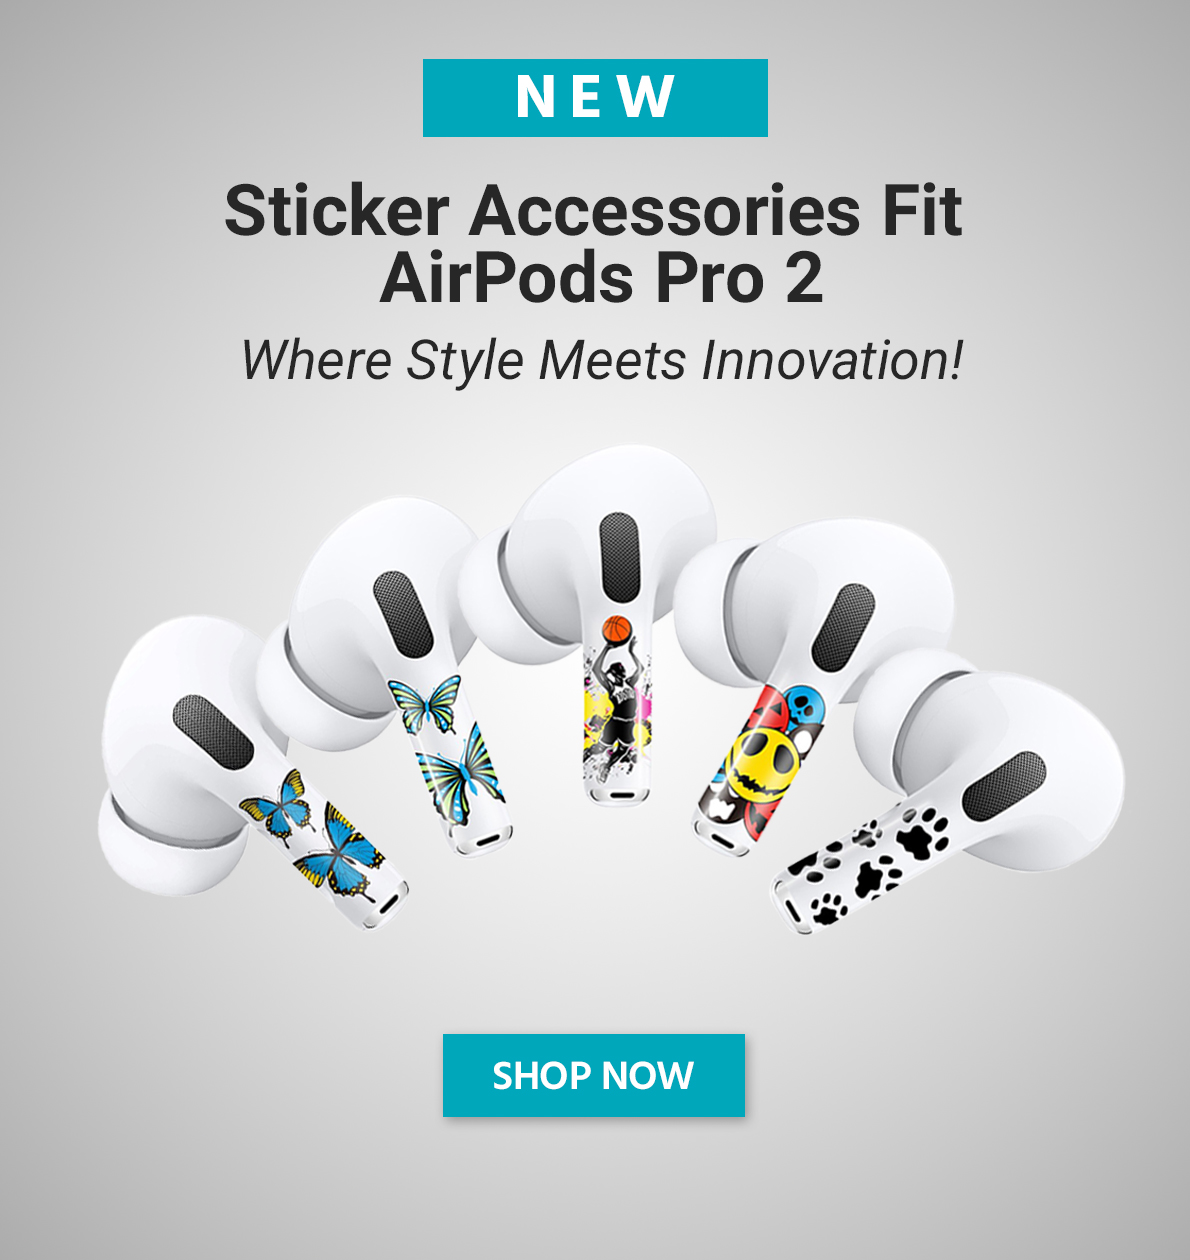 https://images.monoprice.com/cms_images/240102_Airpods_1190x1260.jpg